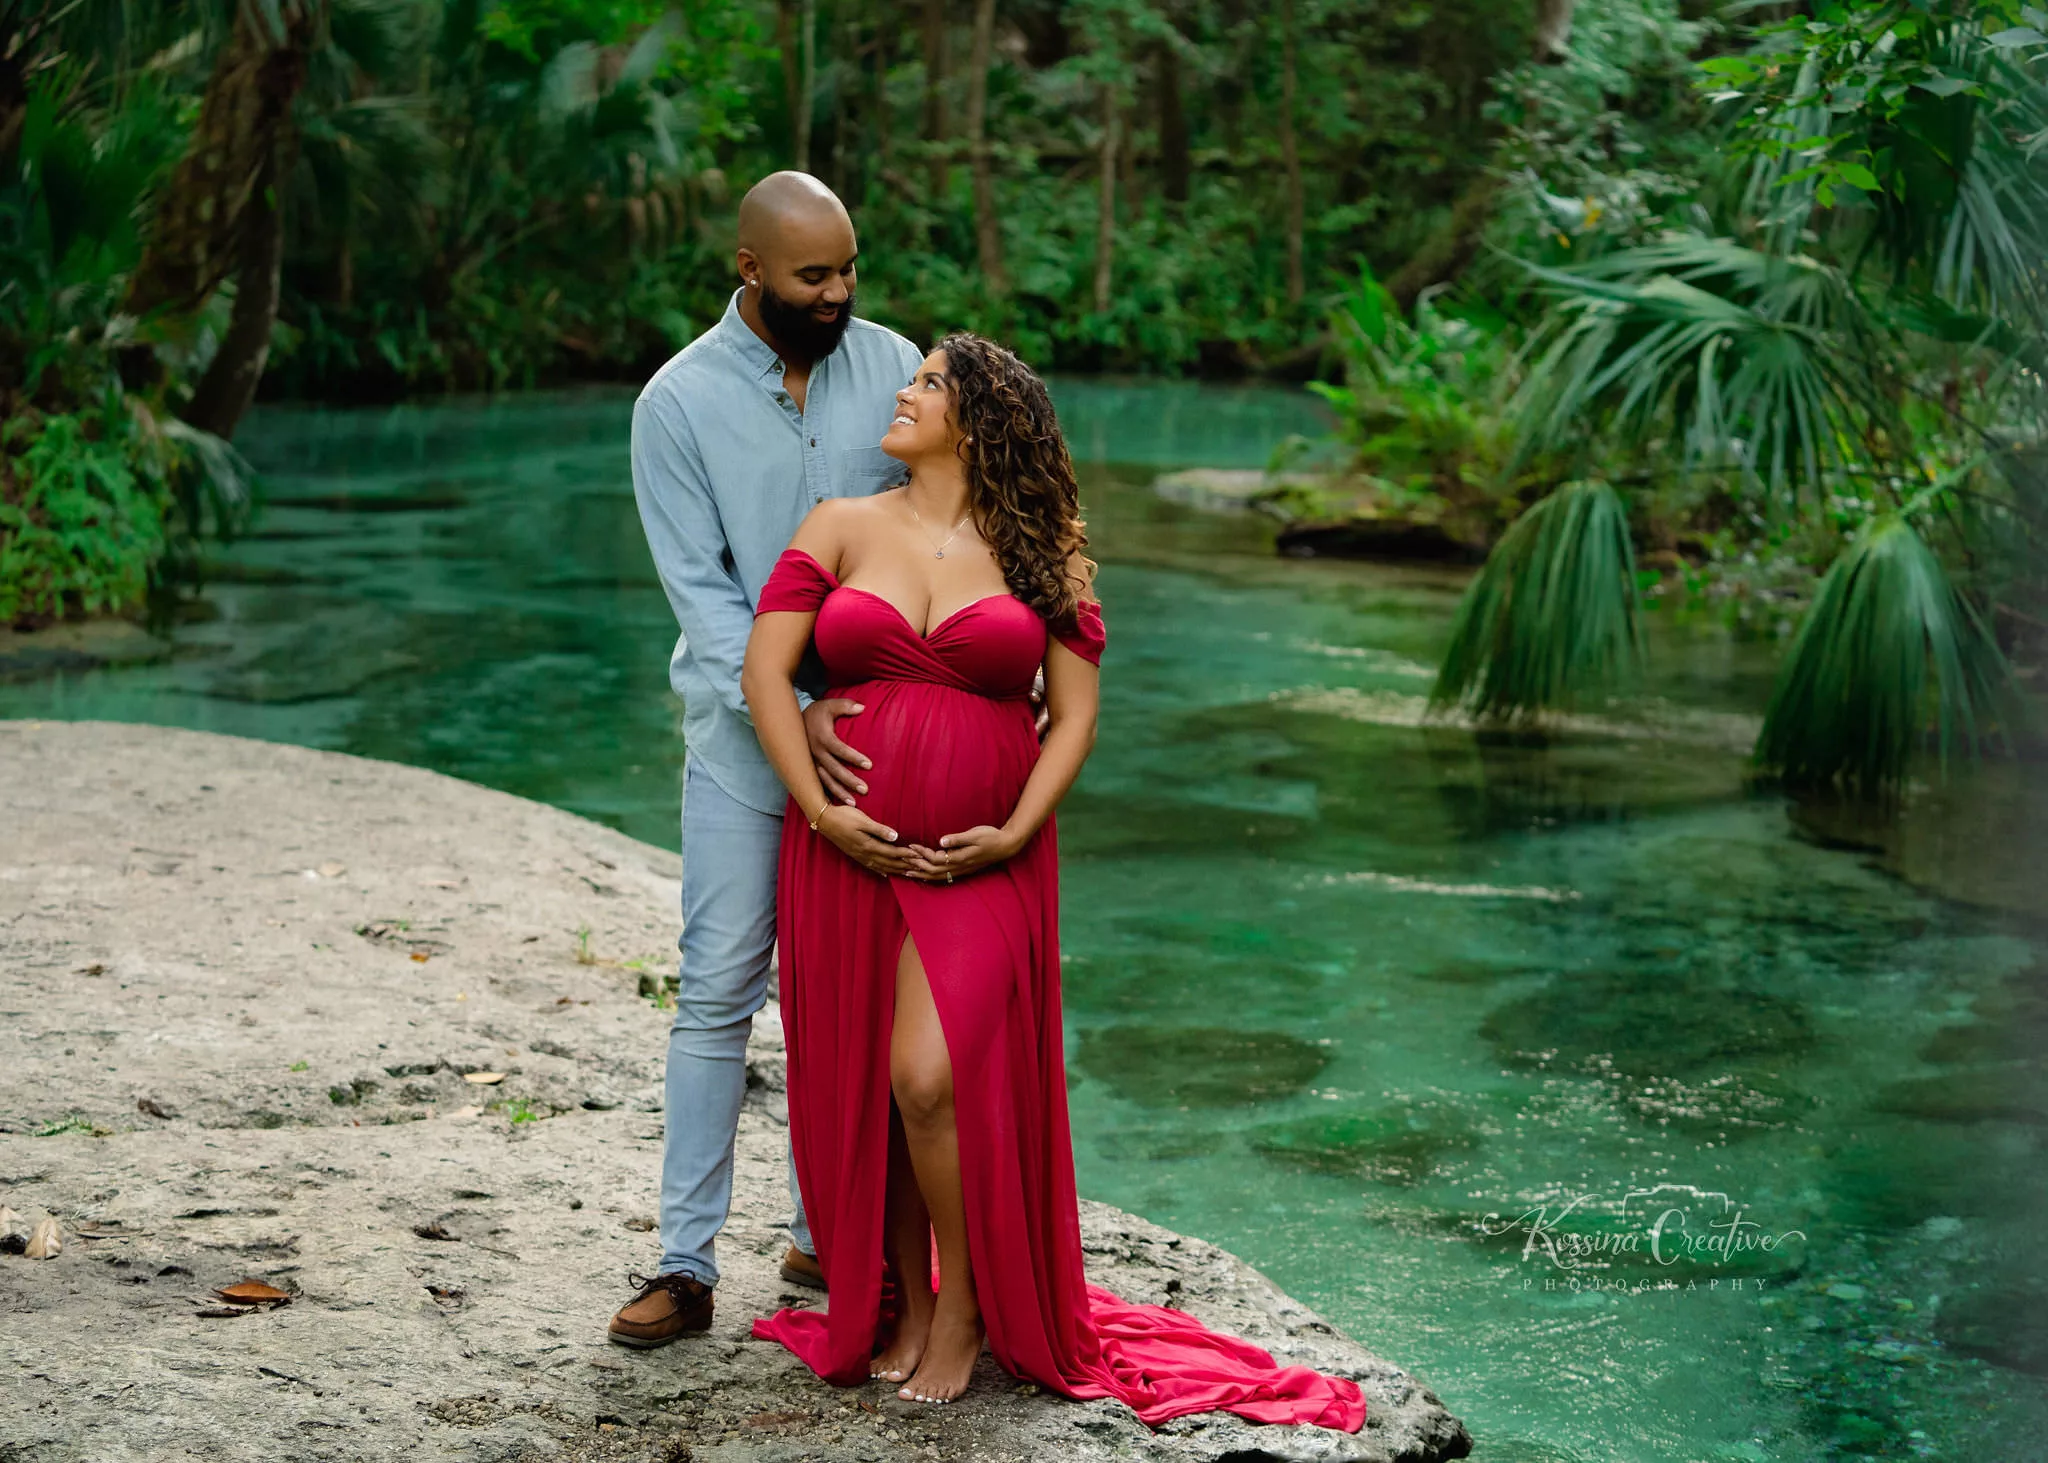 Orlando Maternity Photographer Pregnancy photography rock springs with red dress